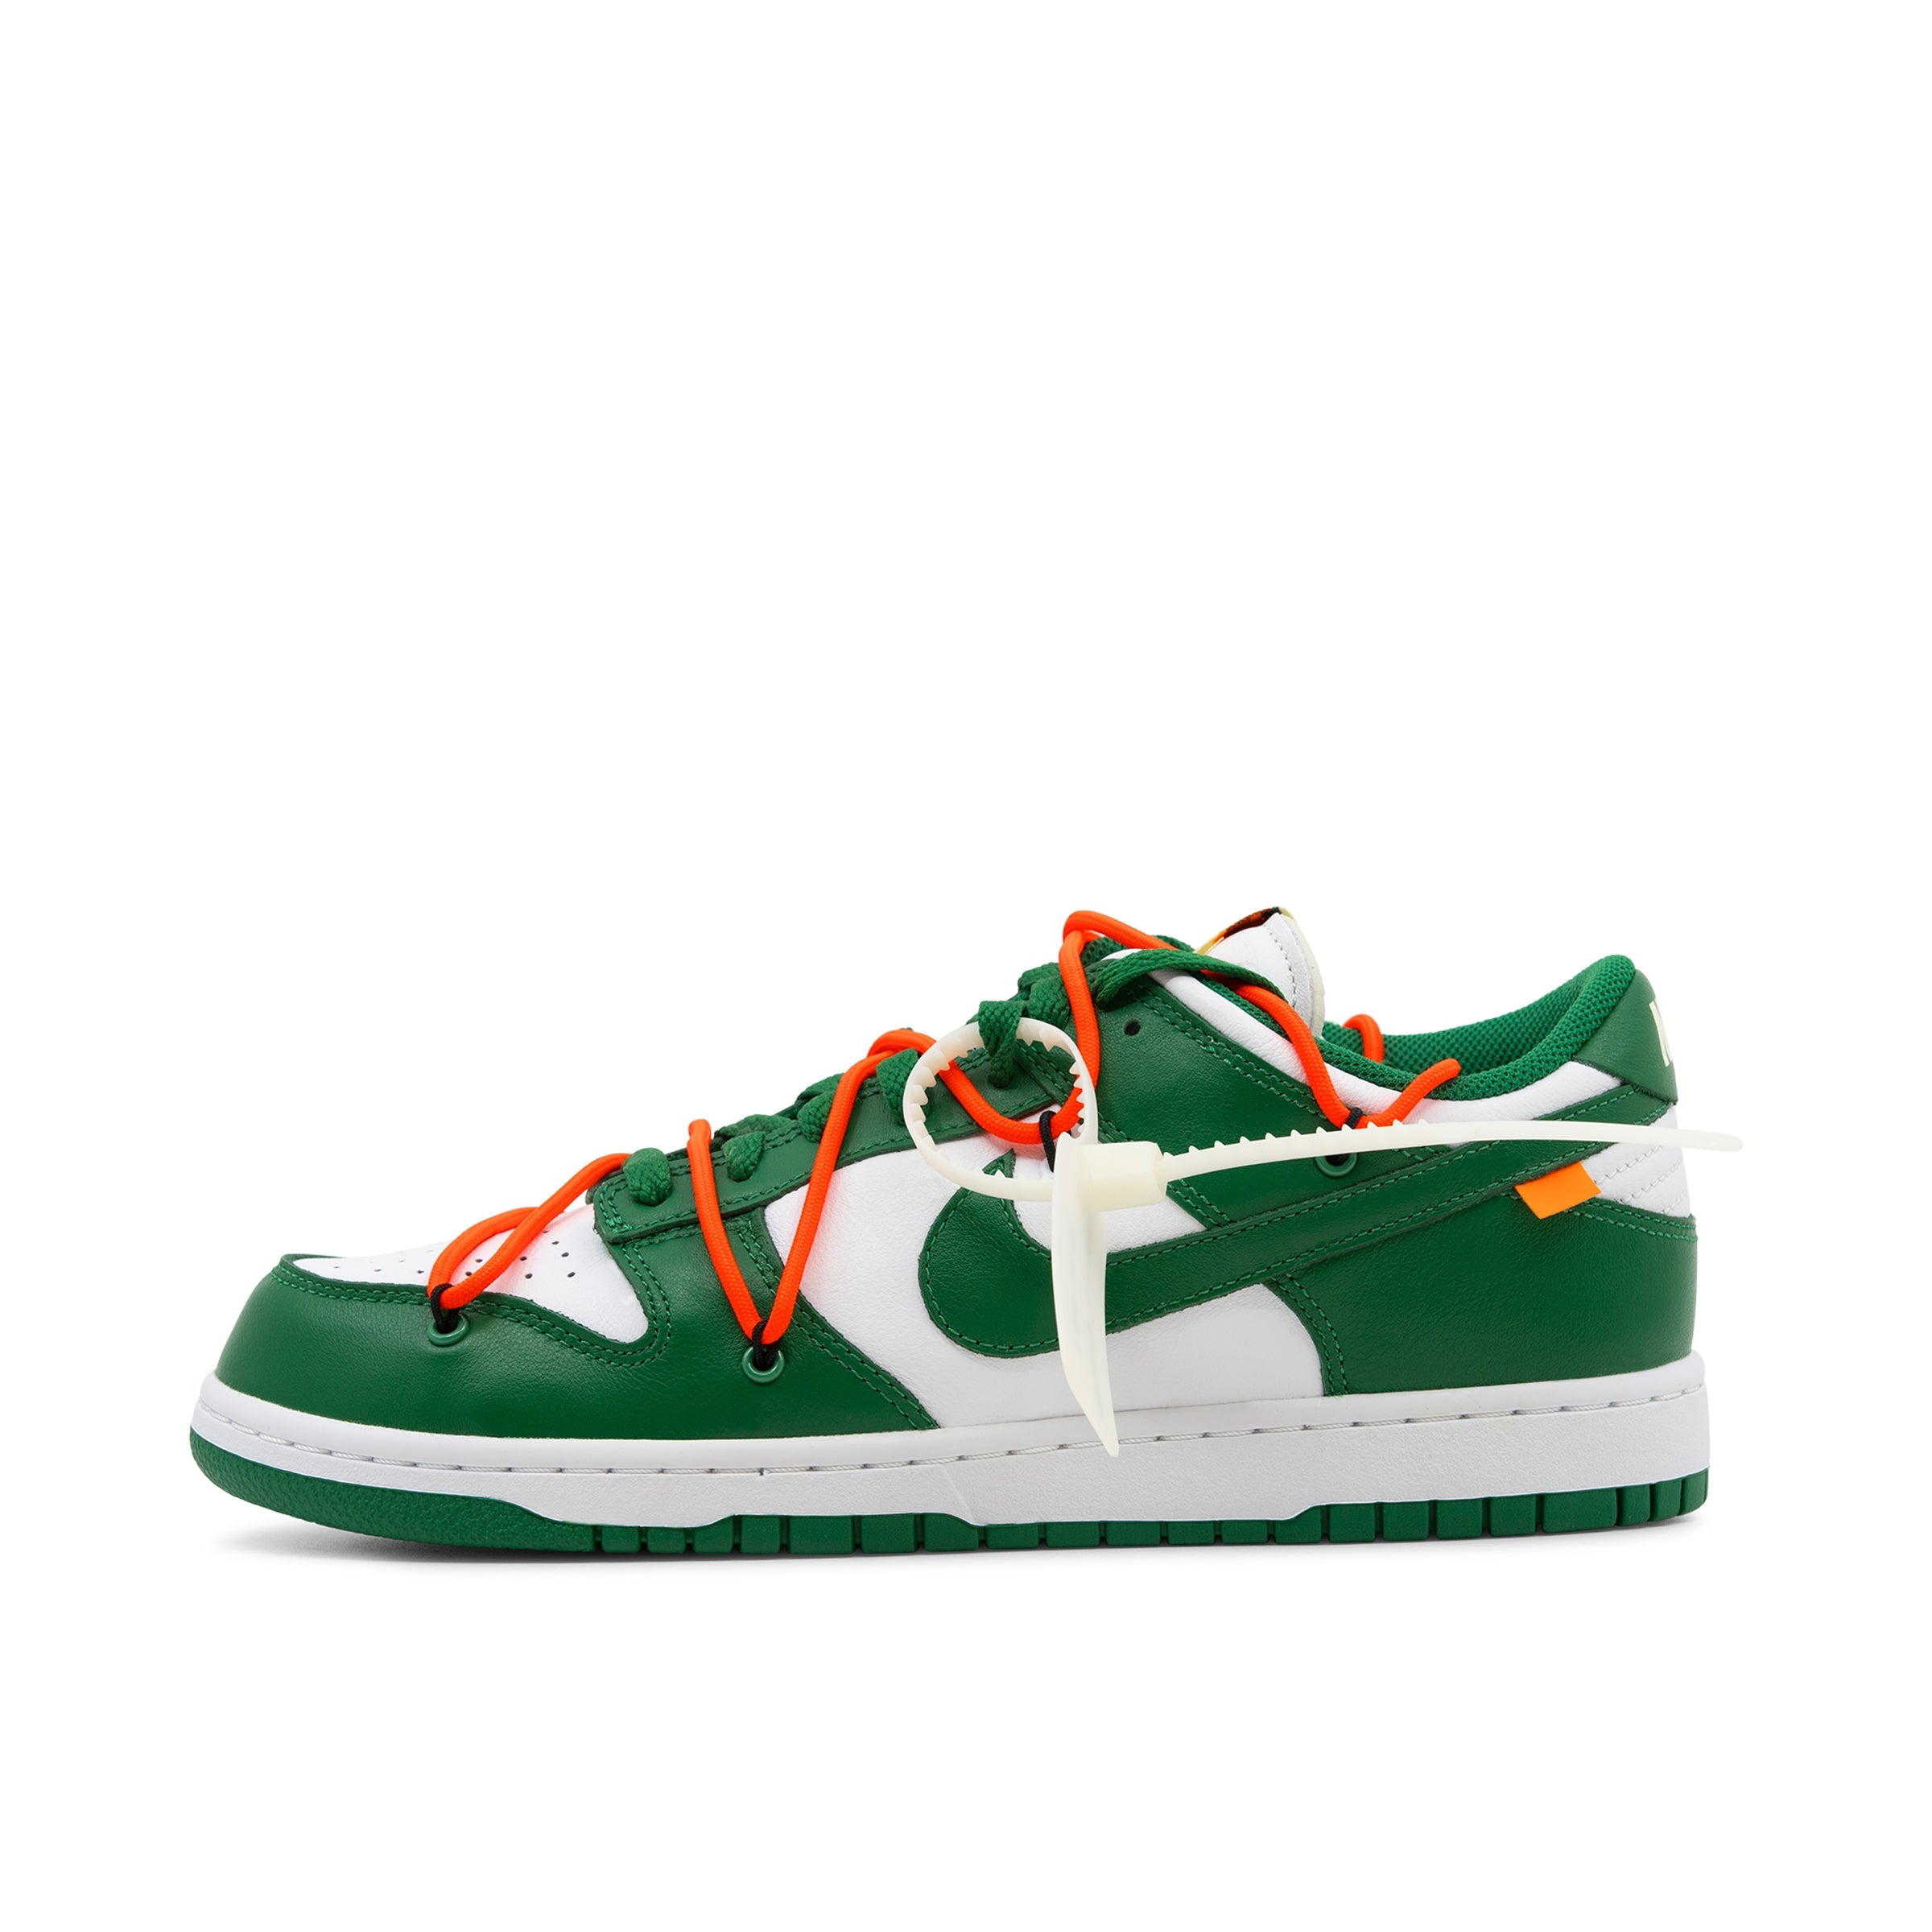 NIKE DUNK LOW OFF-WHITE PINE GREEN